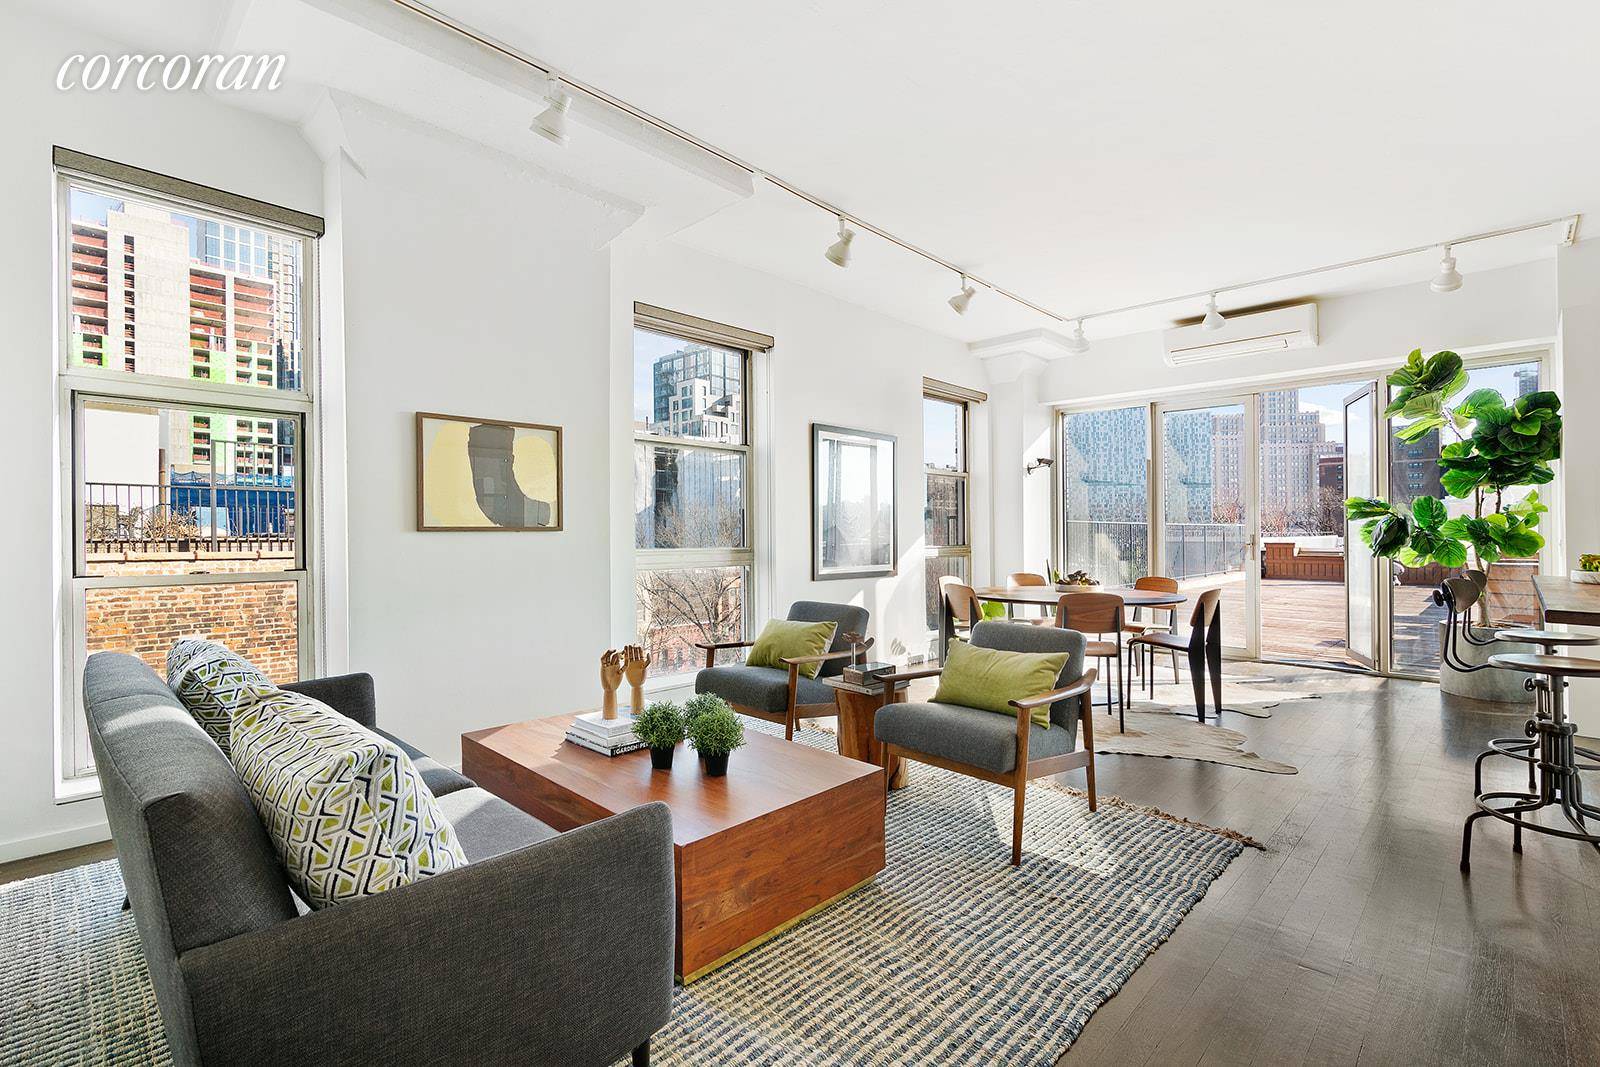 This is the dramatic two bedroom loft space that you have been looking forA.